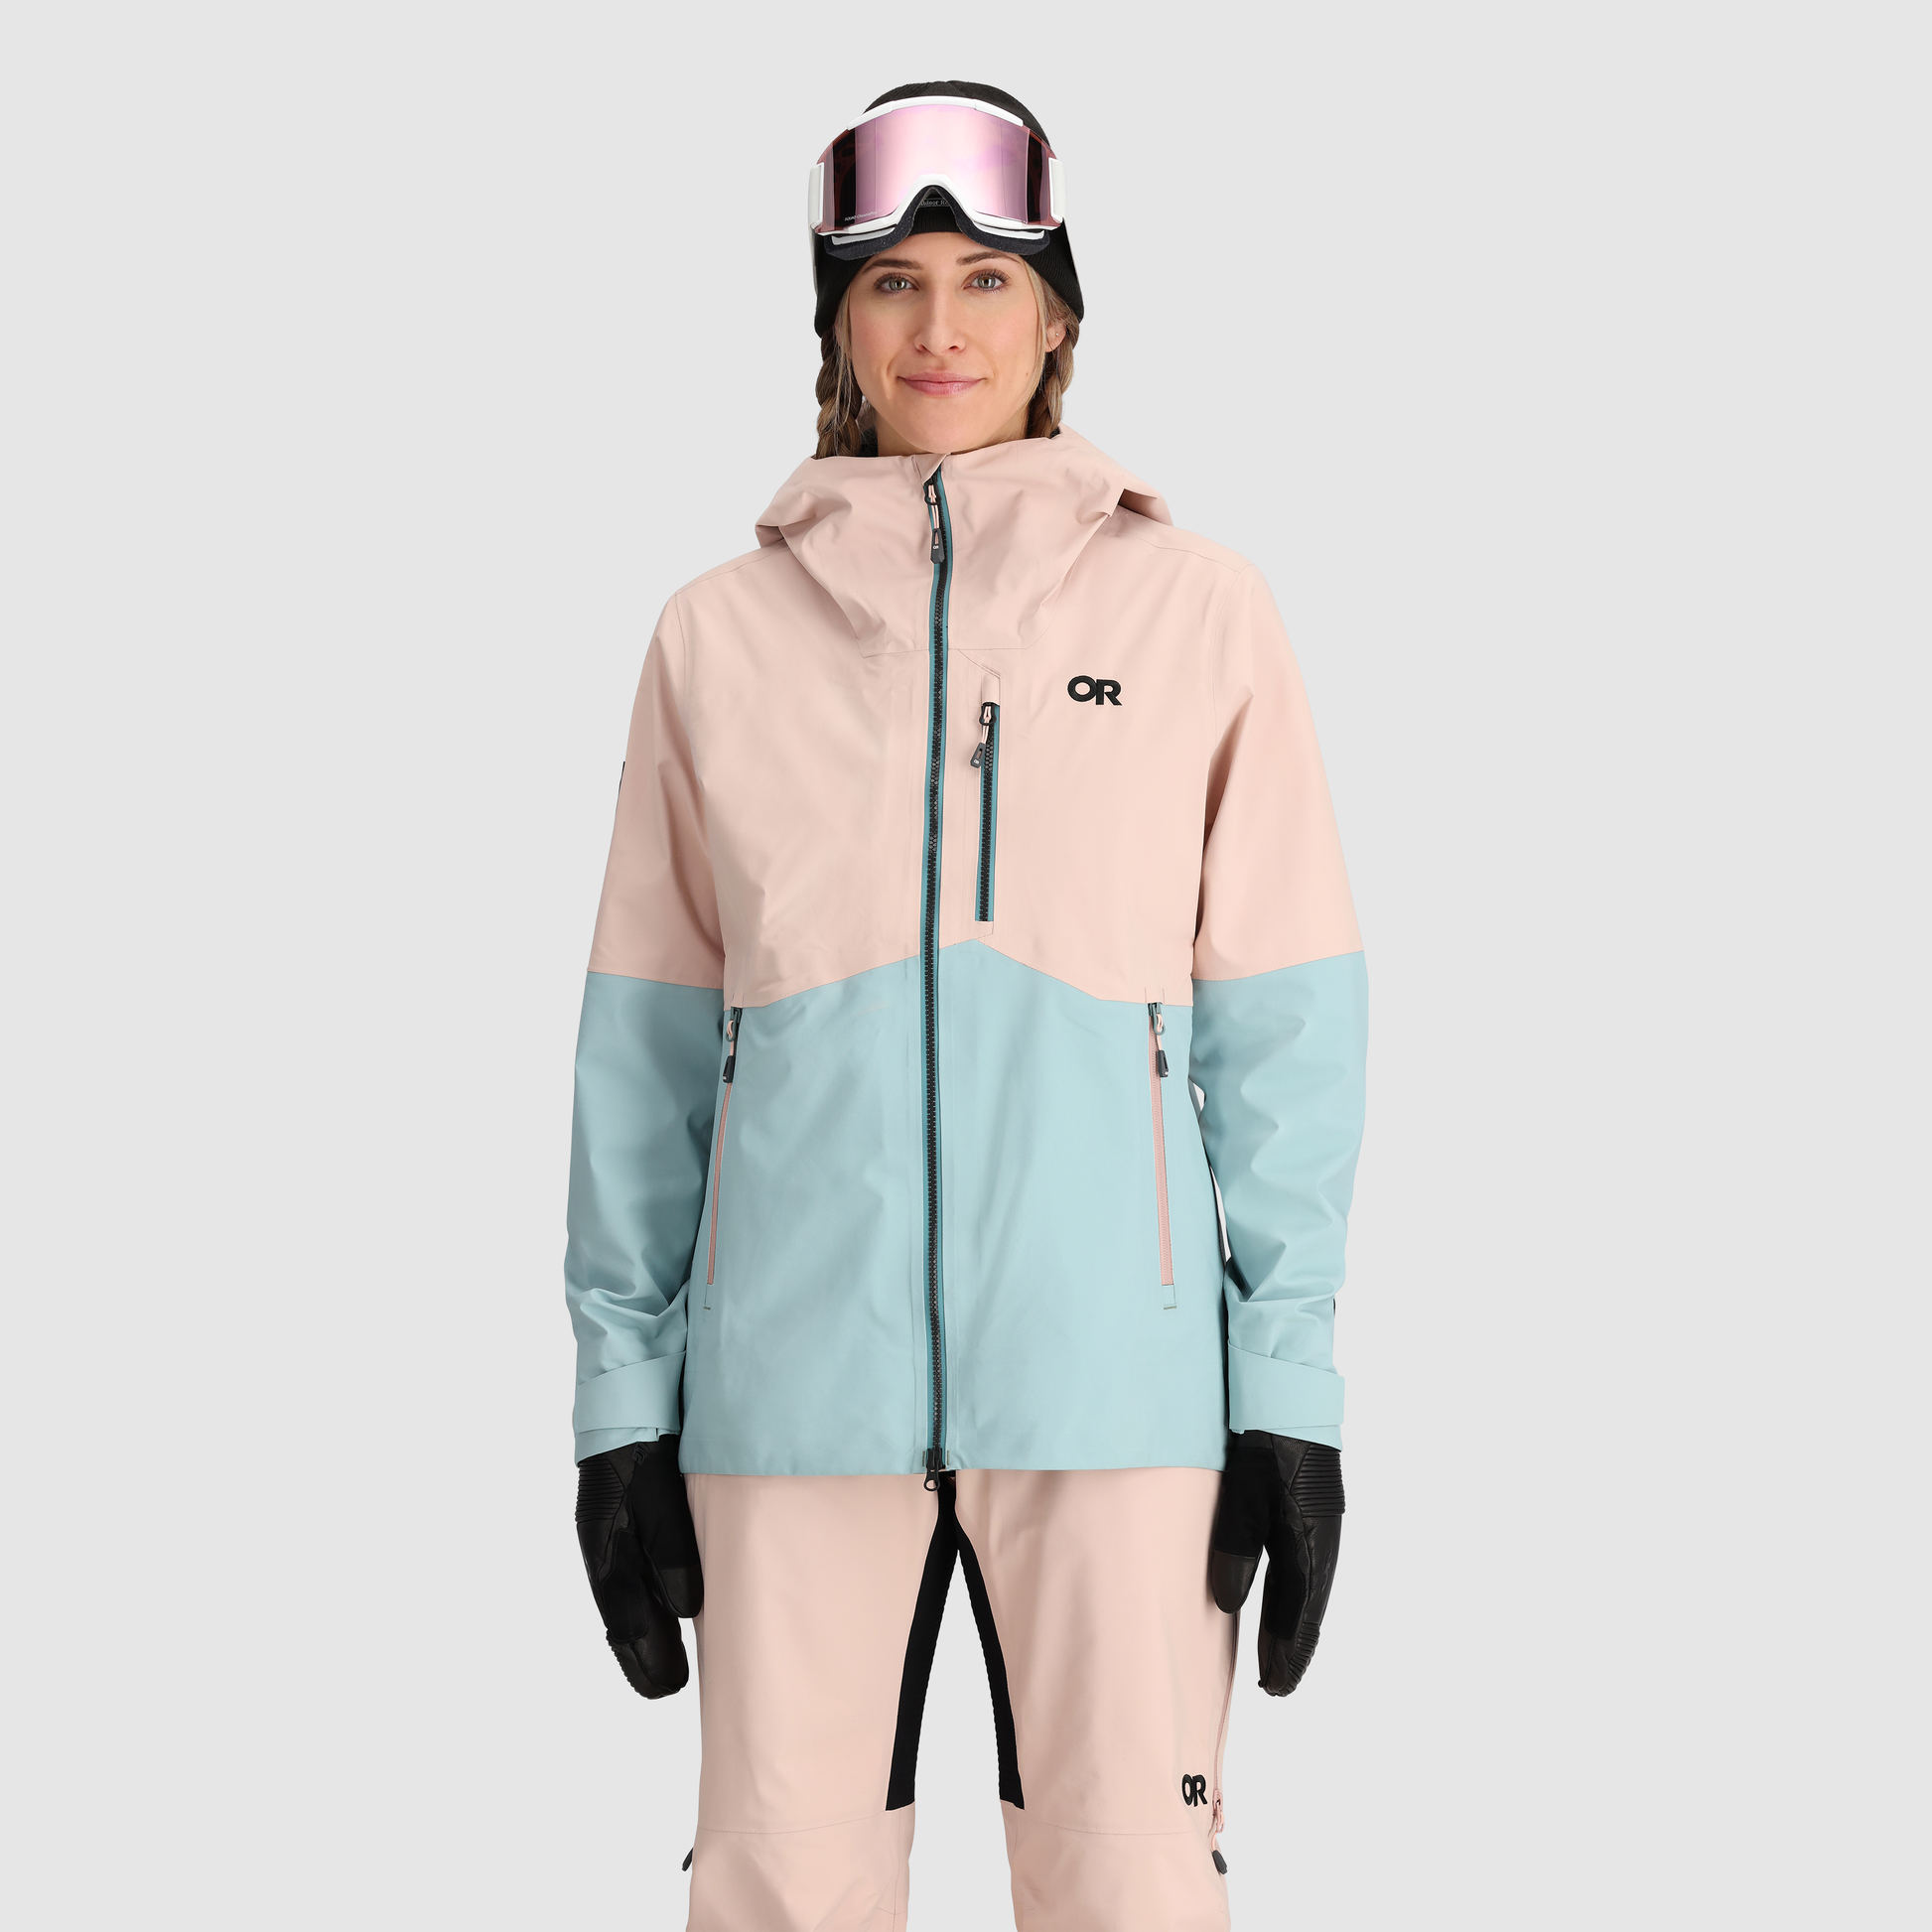 Women's Active Outdoor Jackets & Outerwear